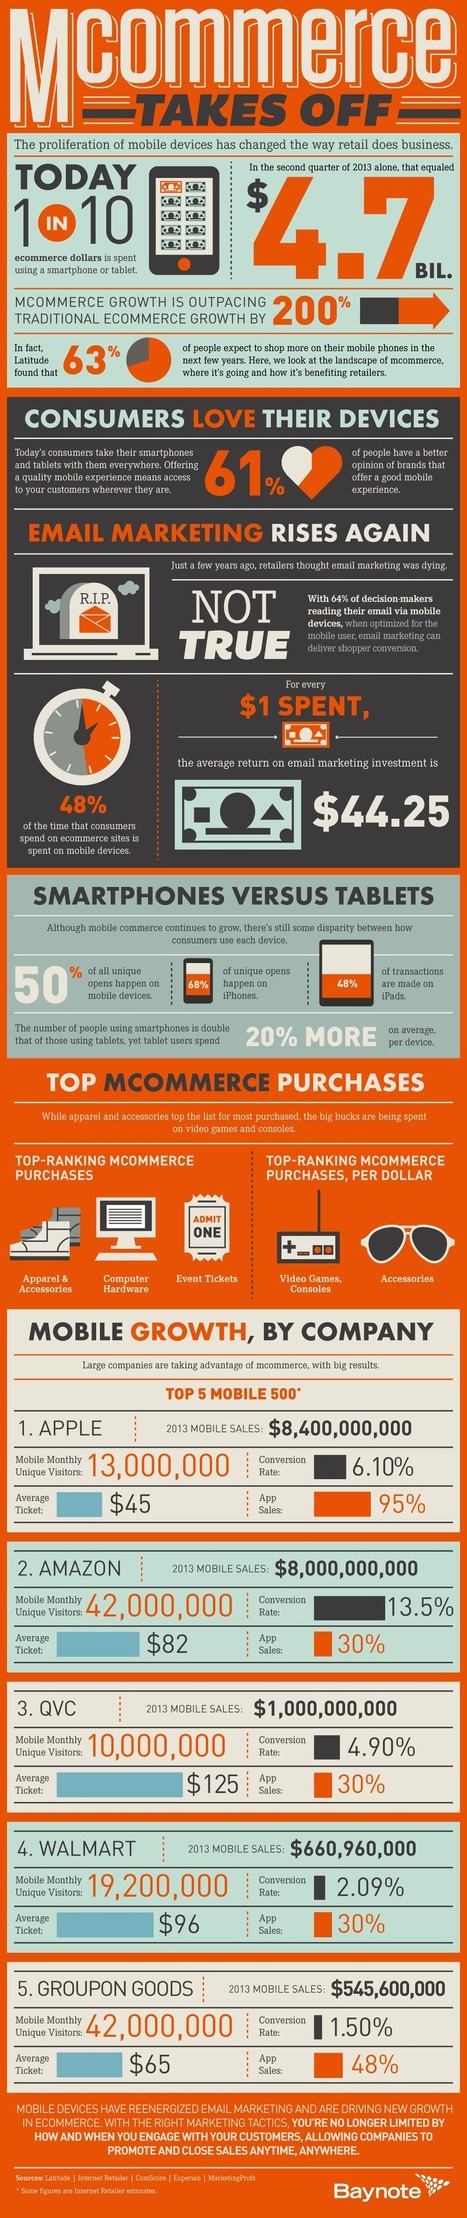 Infographic: MCommerce Growing 200% Faster than ECommerce | digital marketing strategy | Scoop.it